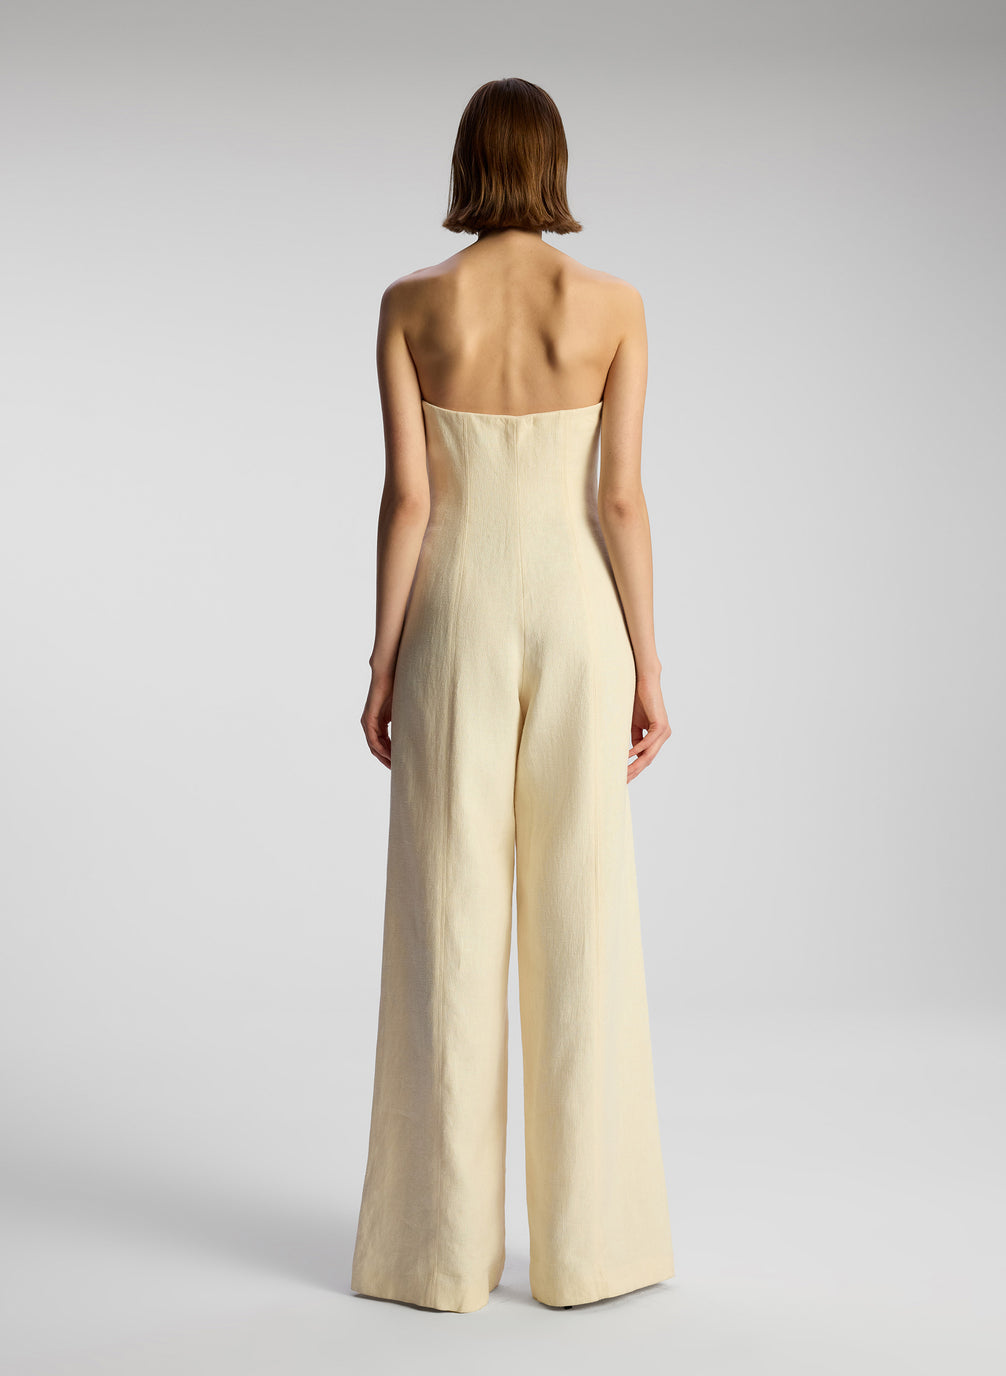 back view of woman wearing cream strapless jumpsuit